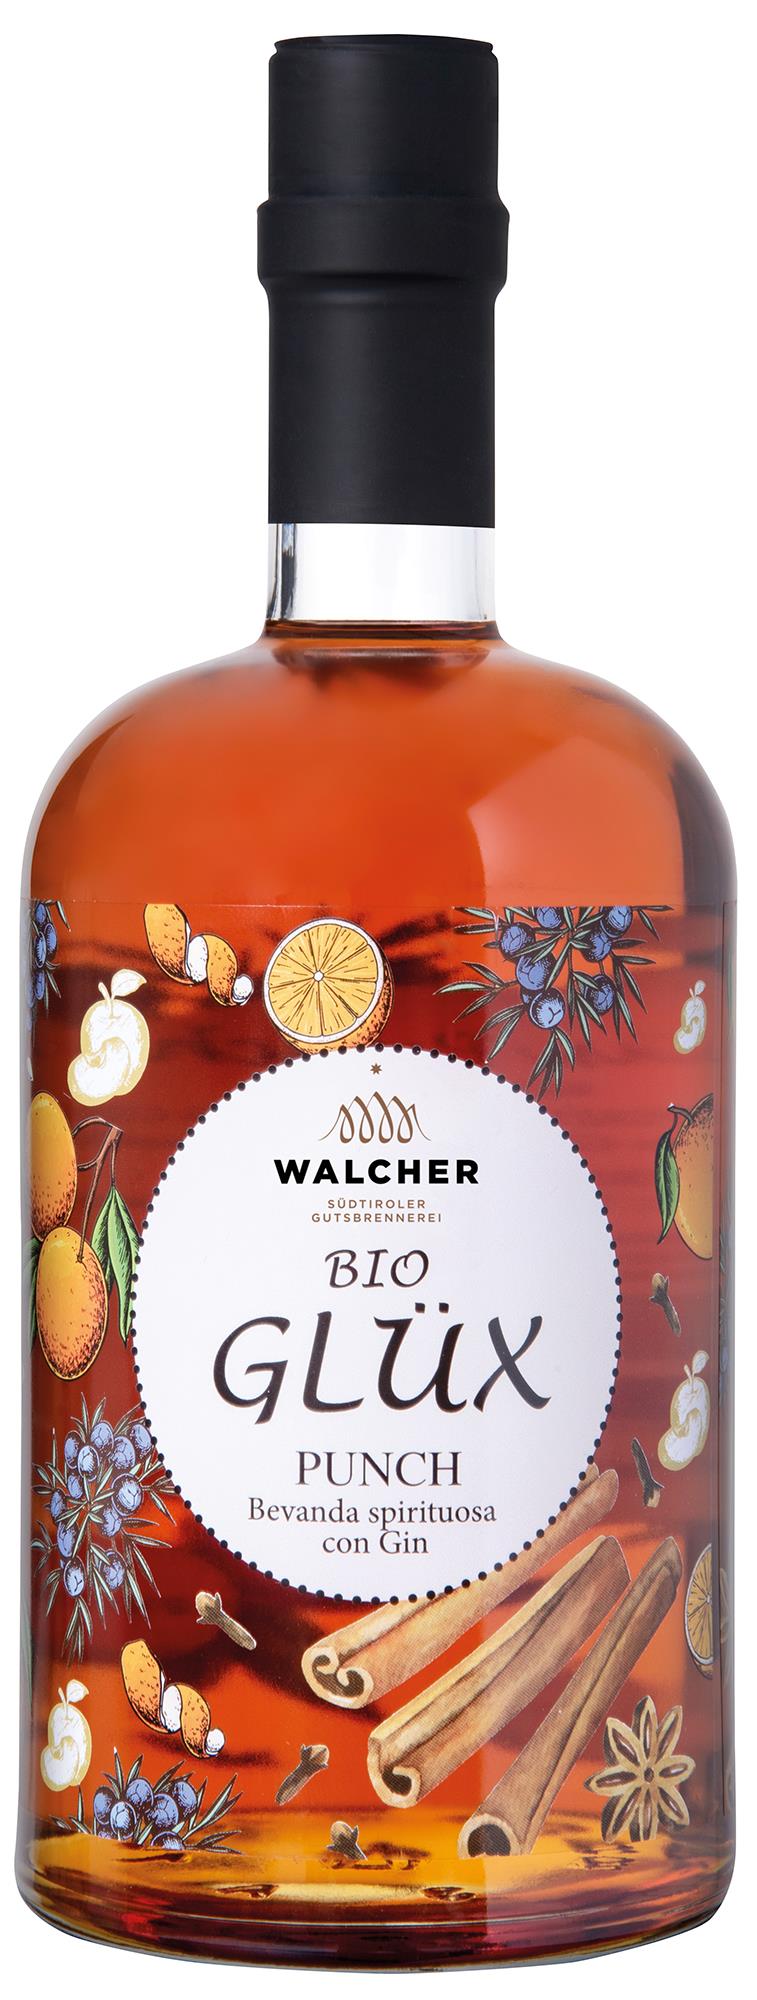 GLUX PUNCH ØKO 22% PUNCH MADE FROM GIN, WALCHER (70CL)